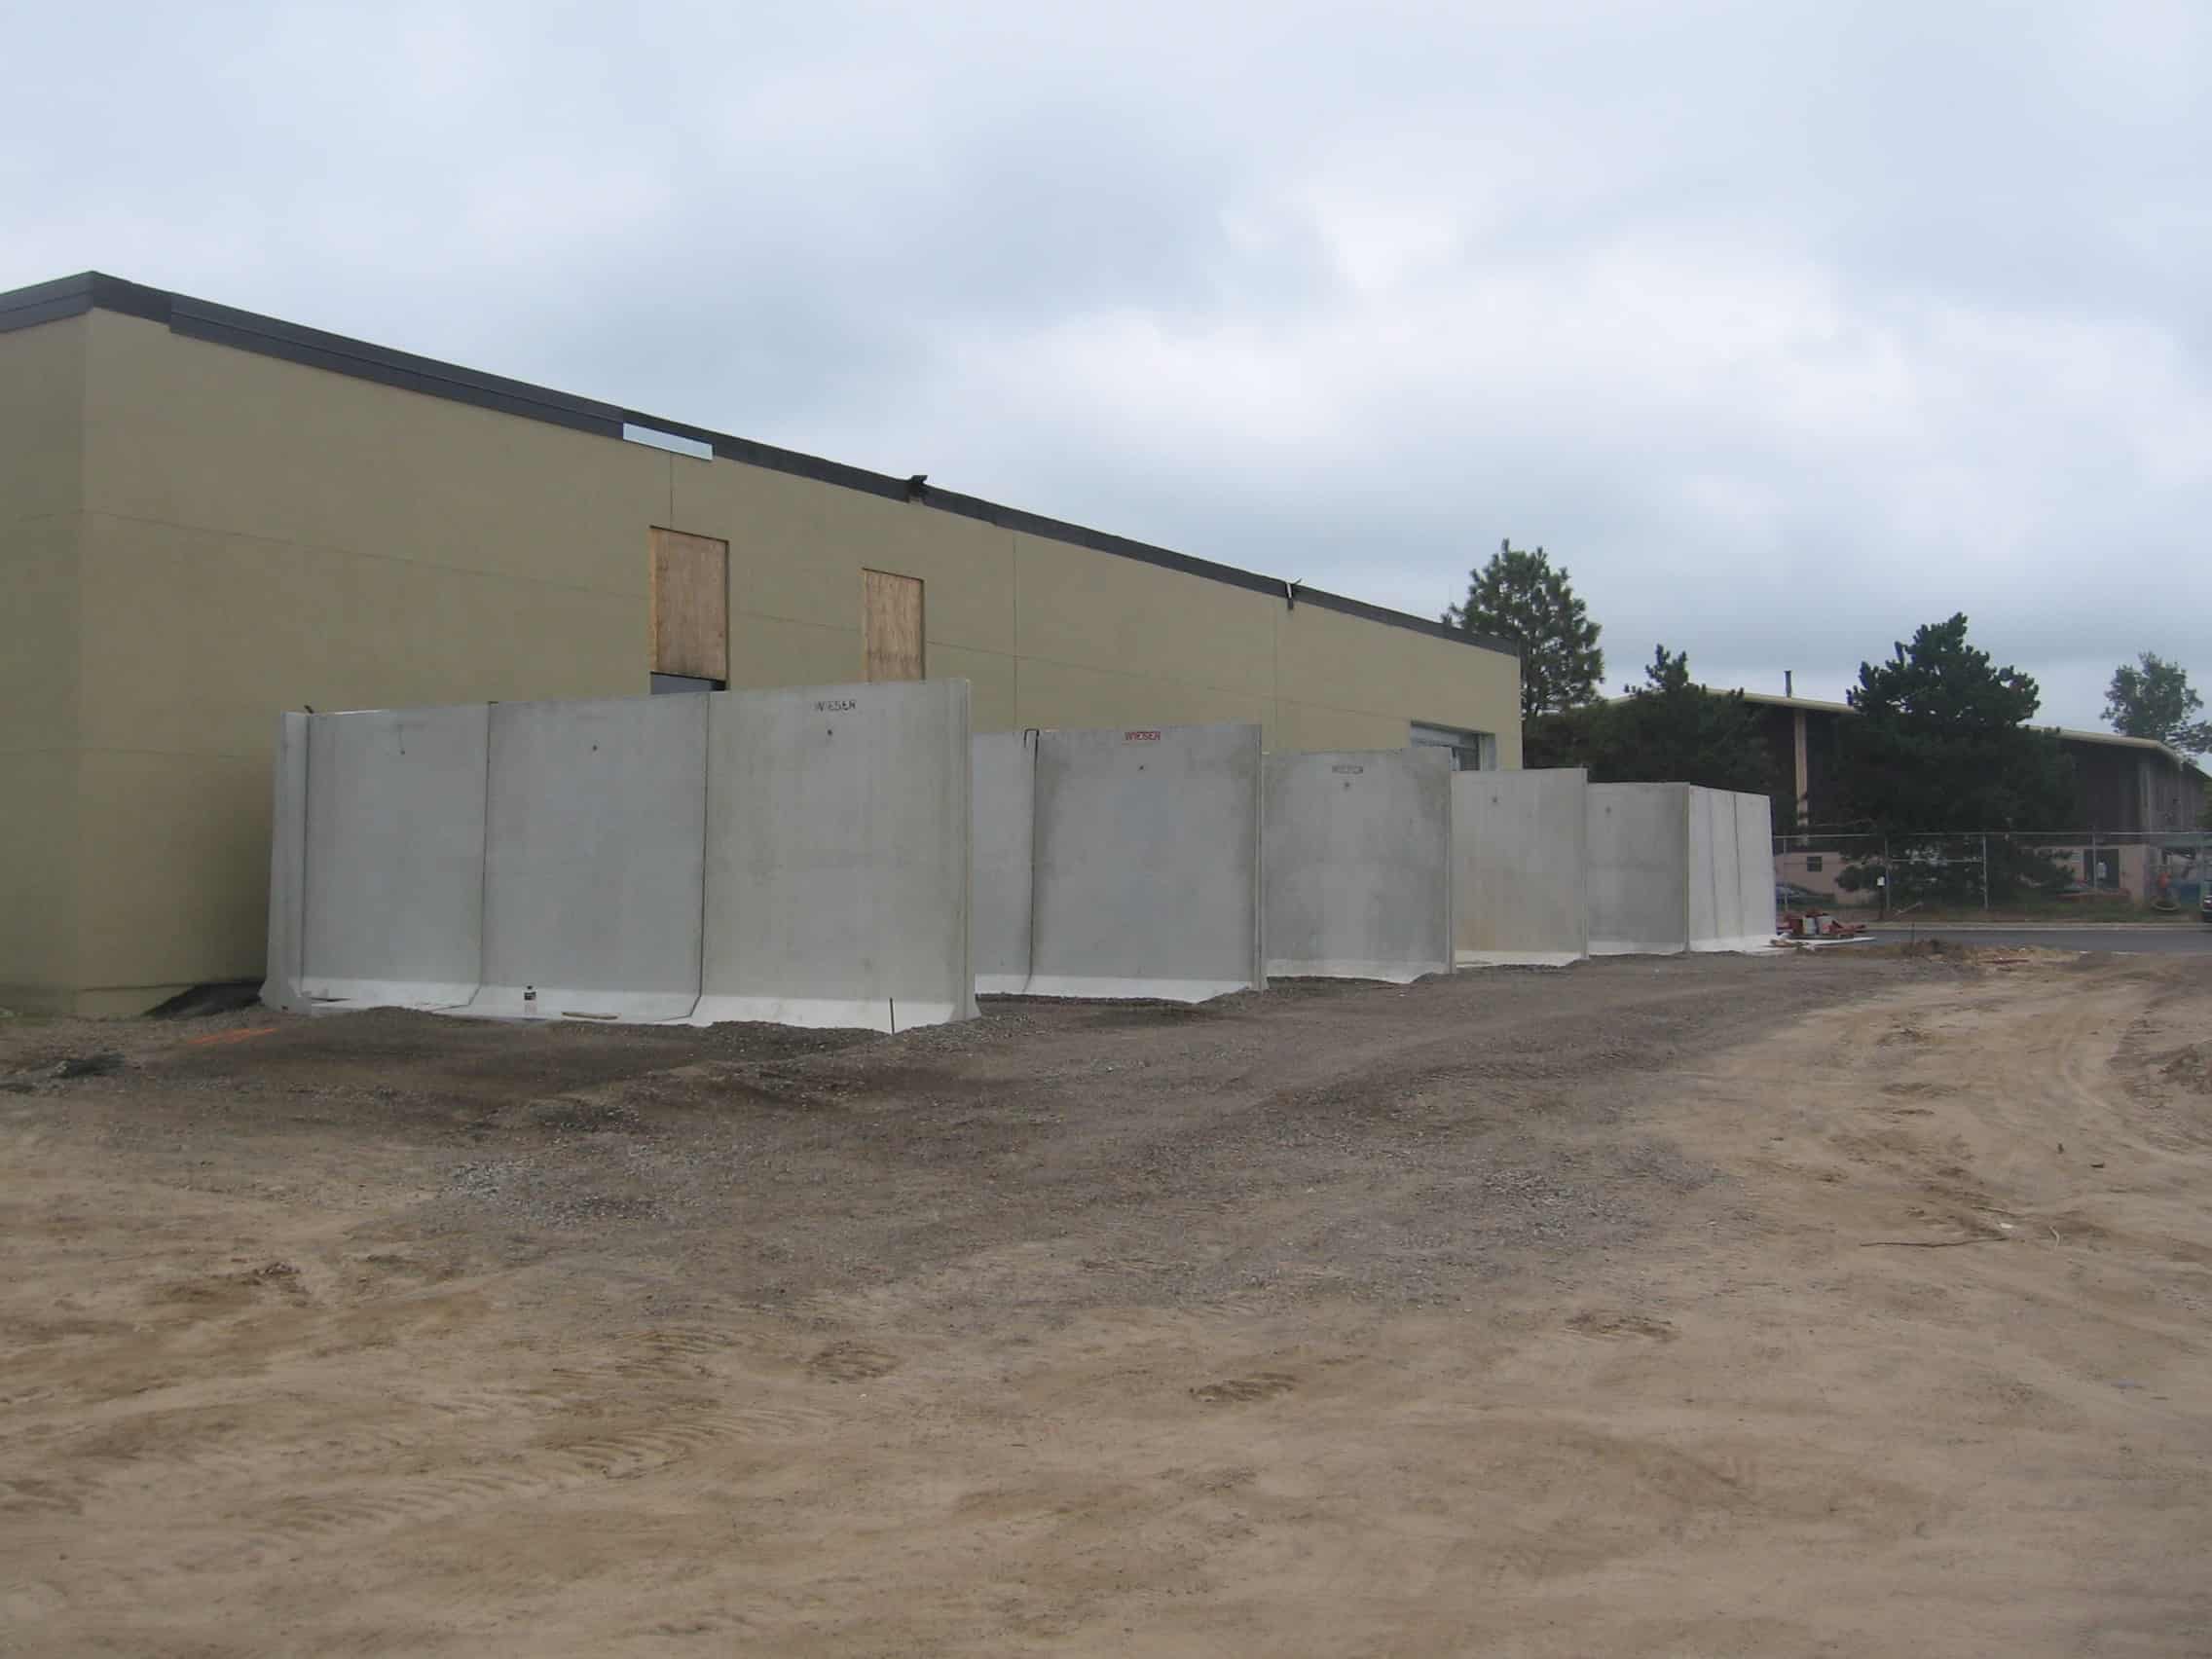 City of Shoreview Maintenance Facility Commodity Storage by Wieser Concrete